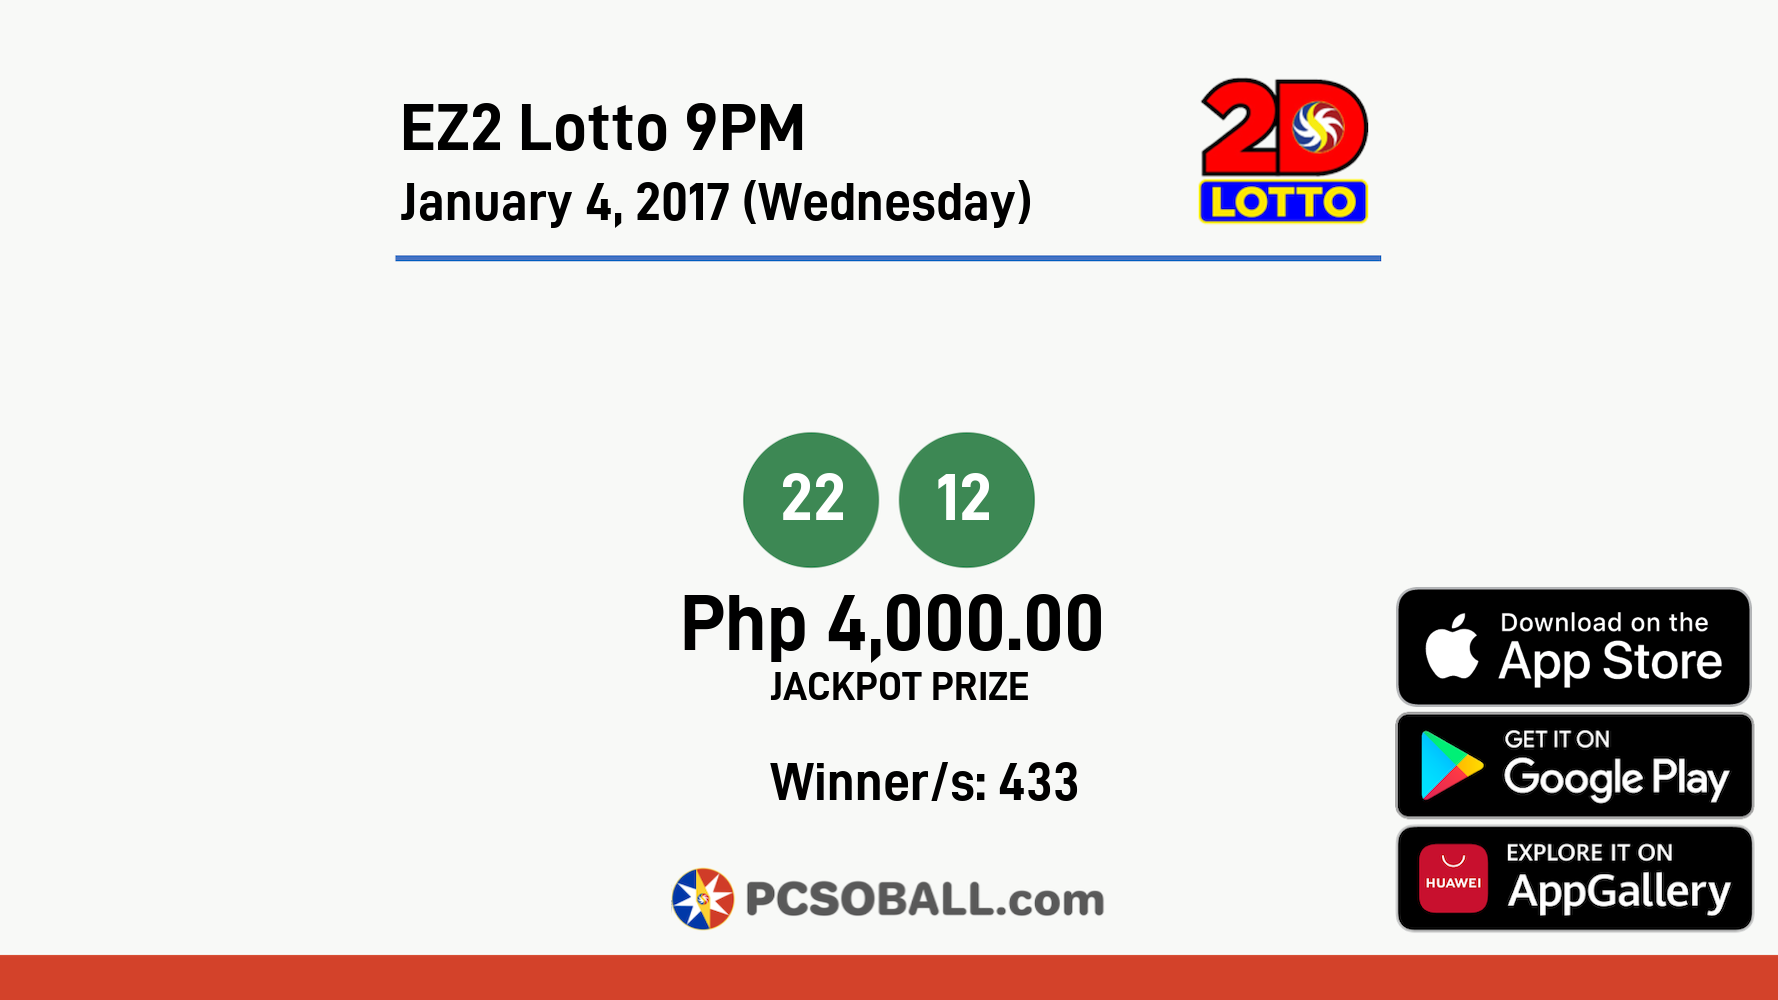 EZ2 Lotto 9PM January 4, 2017 (Wednesday) Result